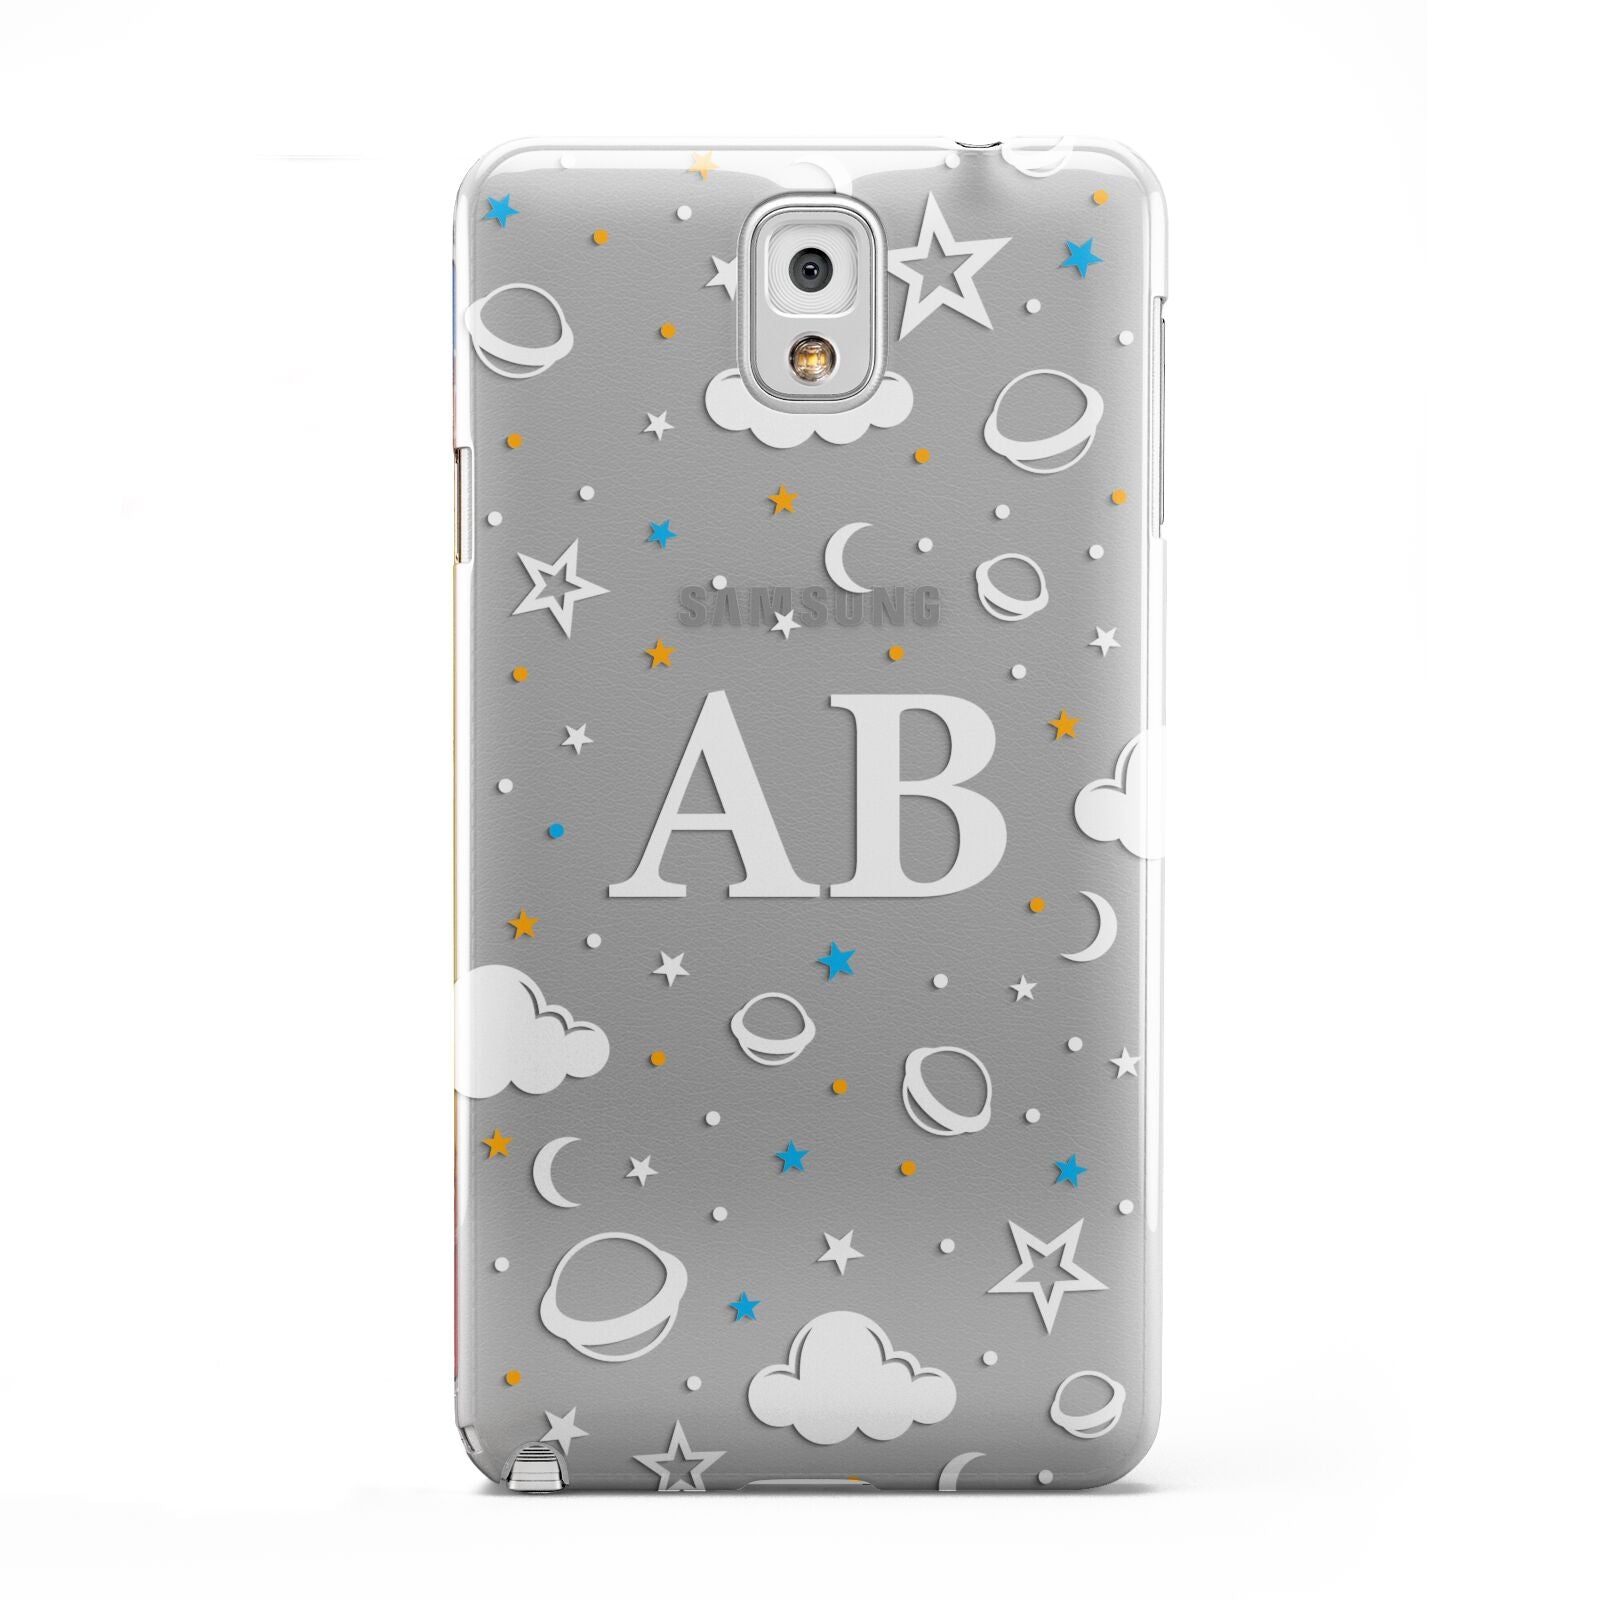 Astronomical Initials Samsung Galaxy Note 3 Case